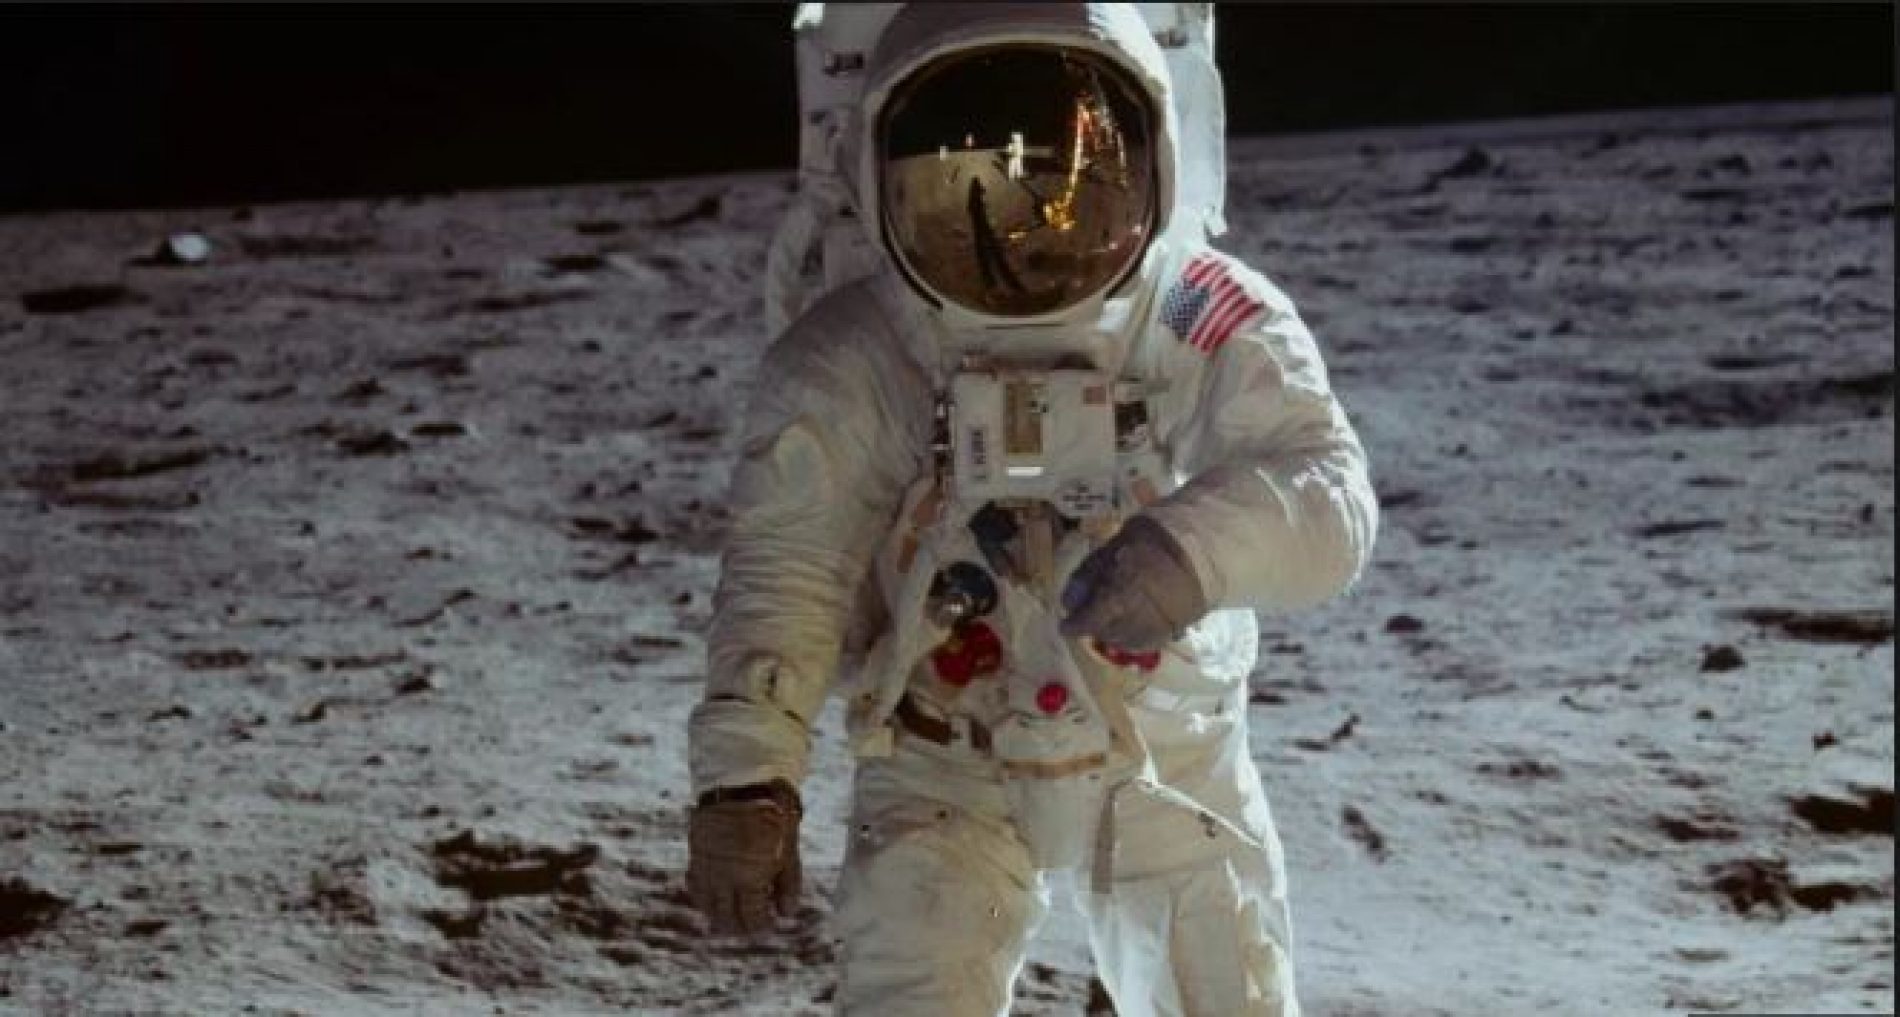 World Celebrates 50th Anniversary of First Landing on the Moon